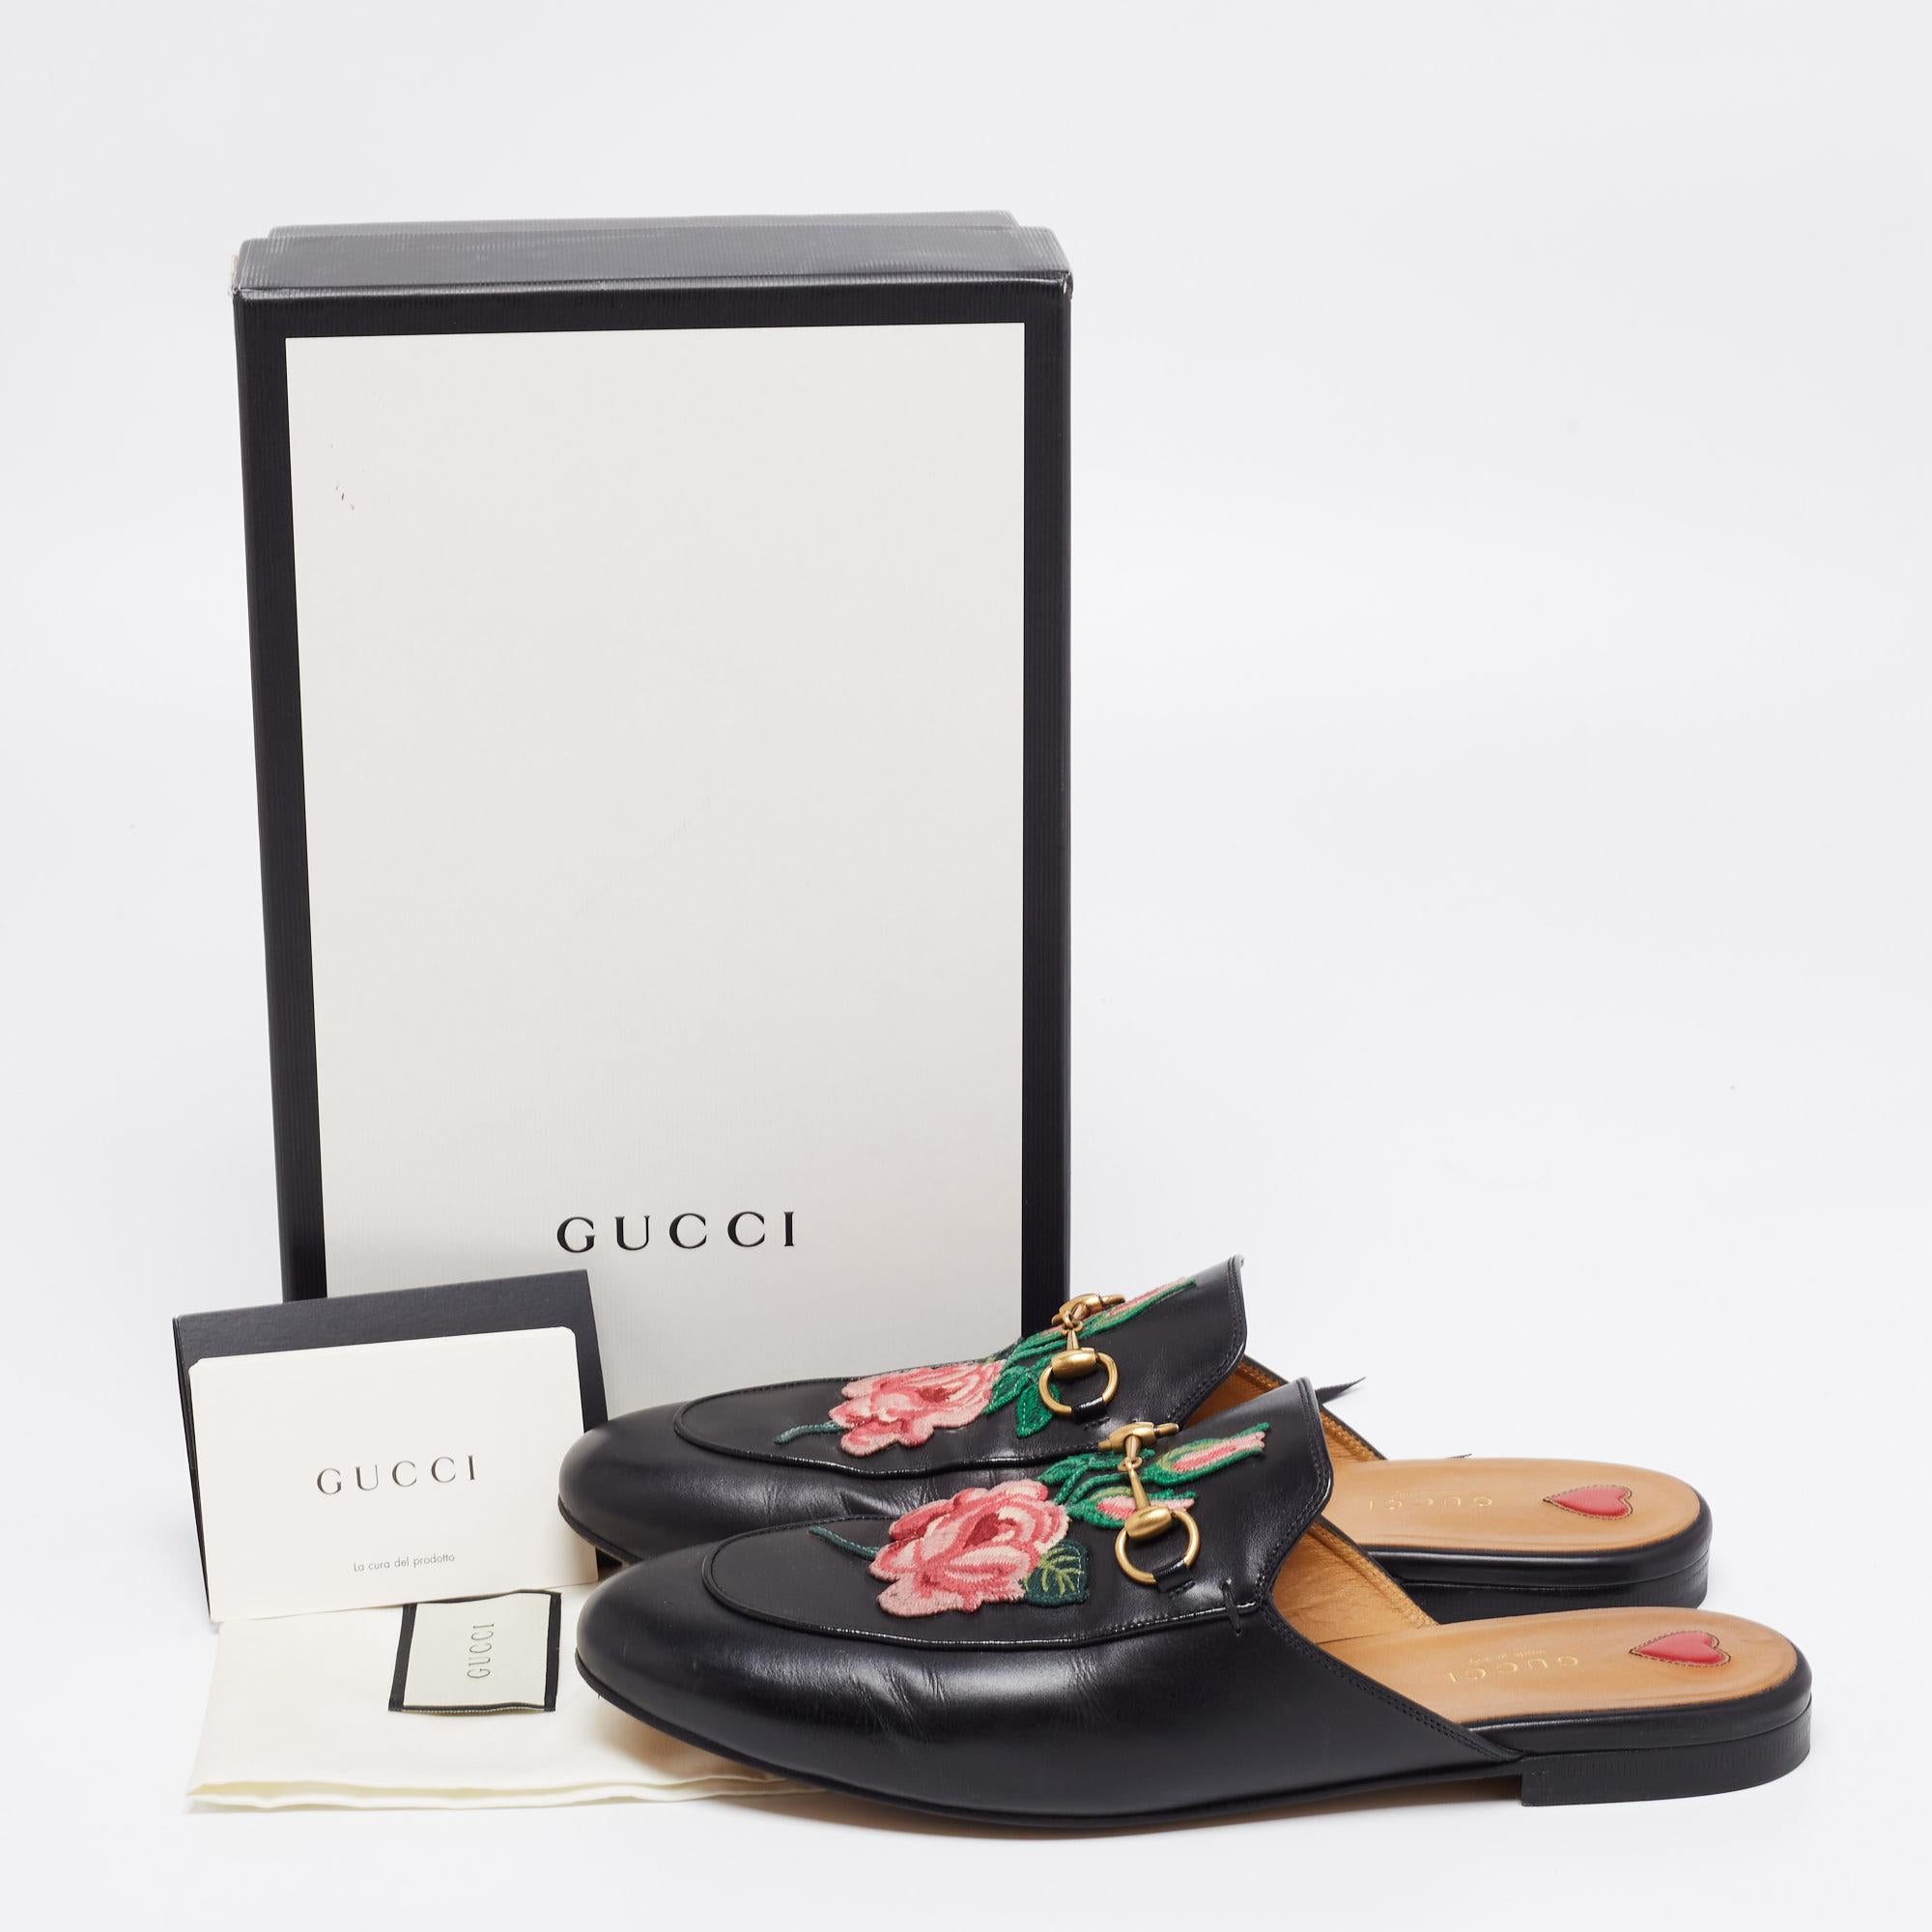 Gucci Black Floral Embroidered Leather Princetown Mules Size 41.5 3